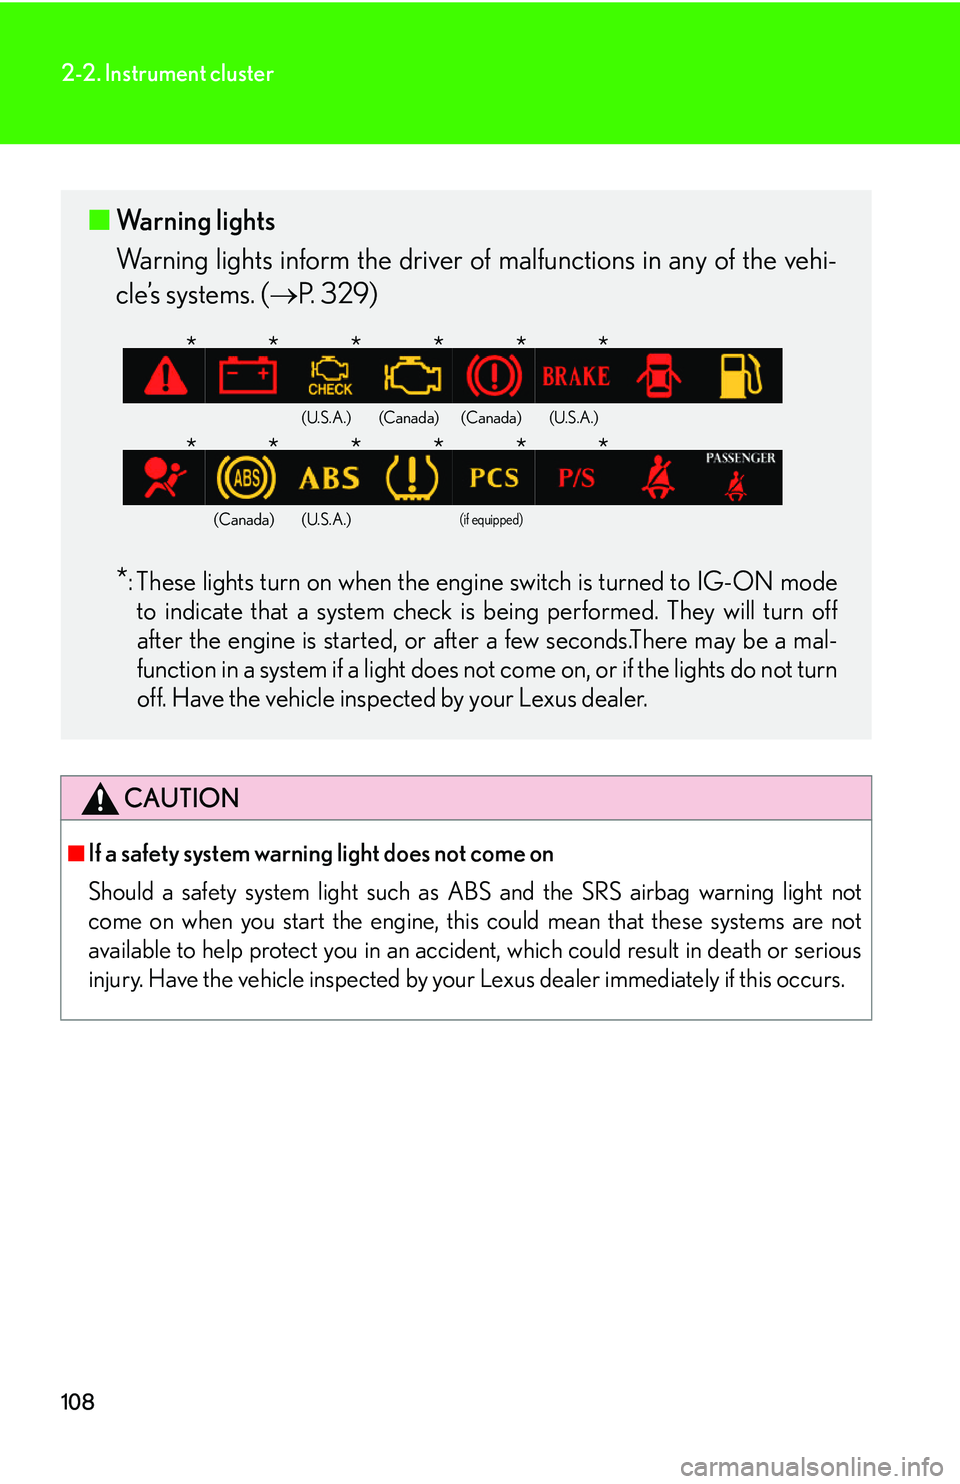 Lexus IS250 2006  Other Functions / LEXUS 2006 IS350/250 THROUGH APRIL 2006 PROD.  (OM53508U) User Guide 108
2-2. Instrument cluster
CAUTION
■If a safety system warning light does not come on 
Should a safety system light such as ABS and the SRS airbag warning light not
come on when you start the engin